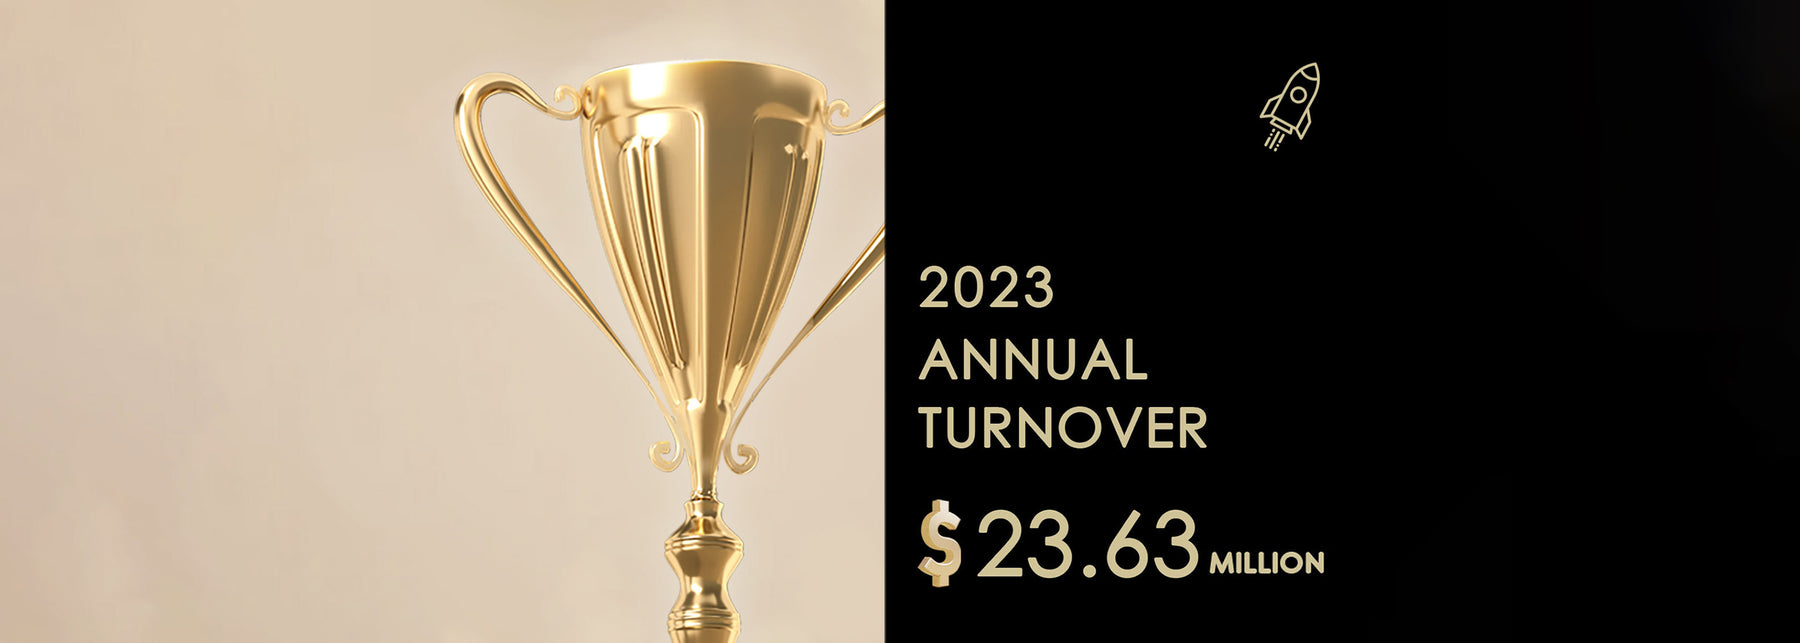 ALUSSO has reached an annual turnover of $23.63 million in FY2023